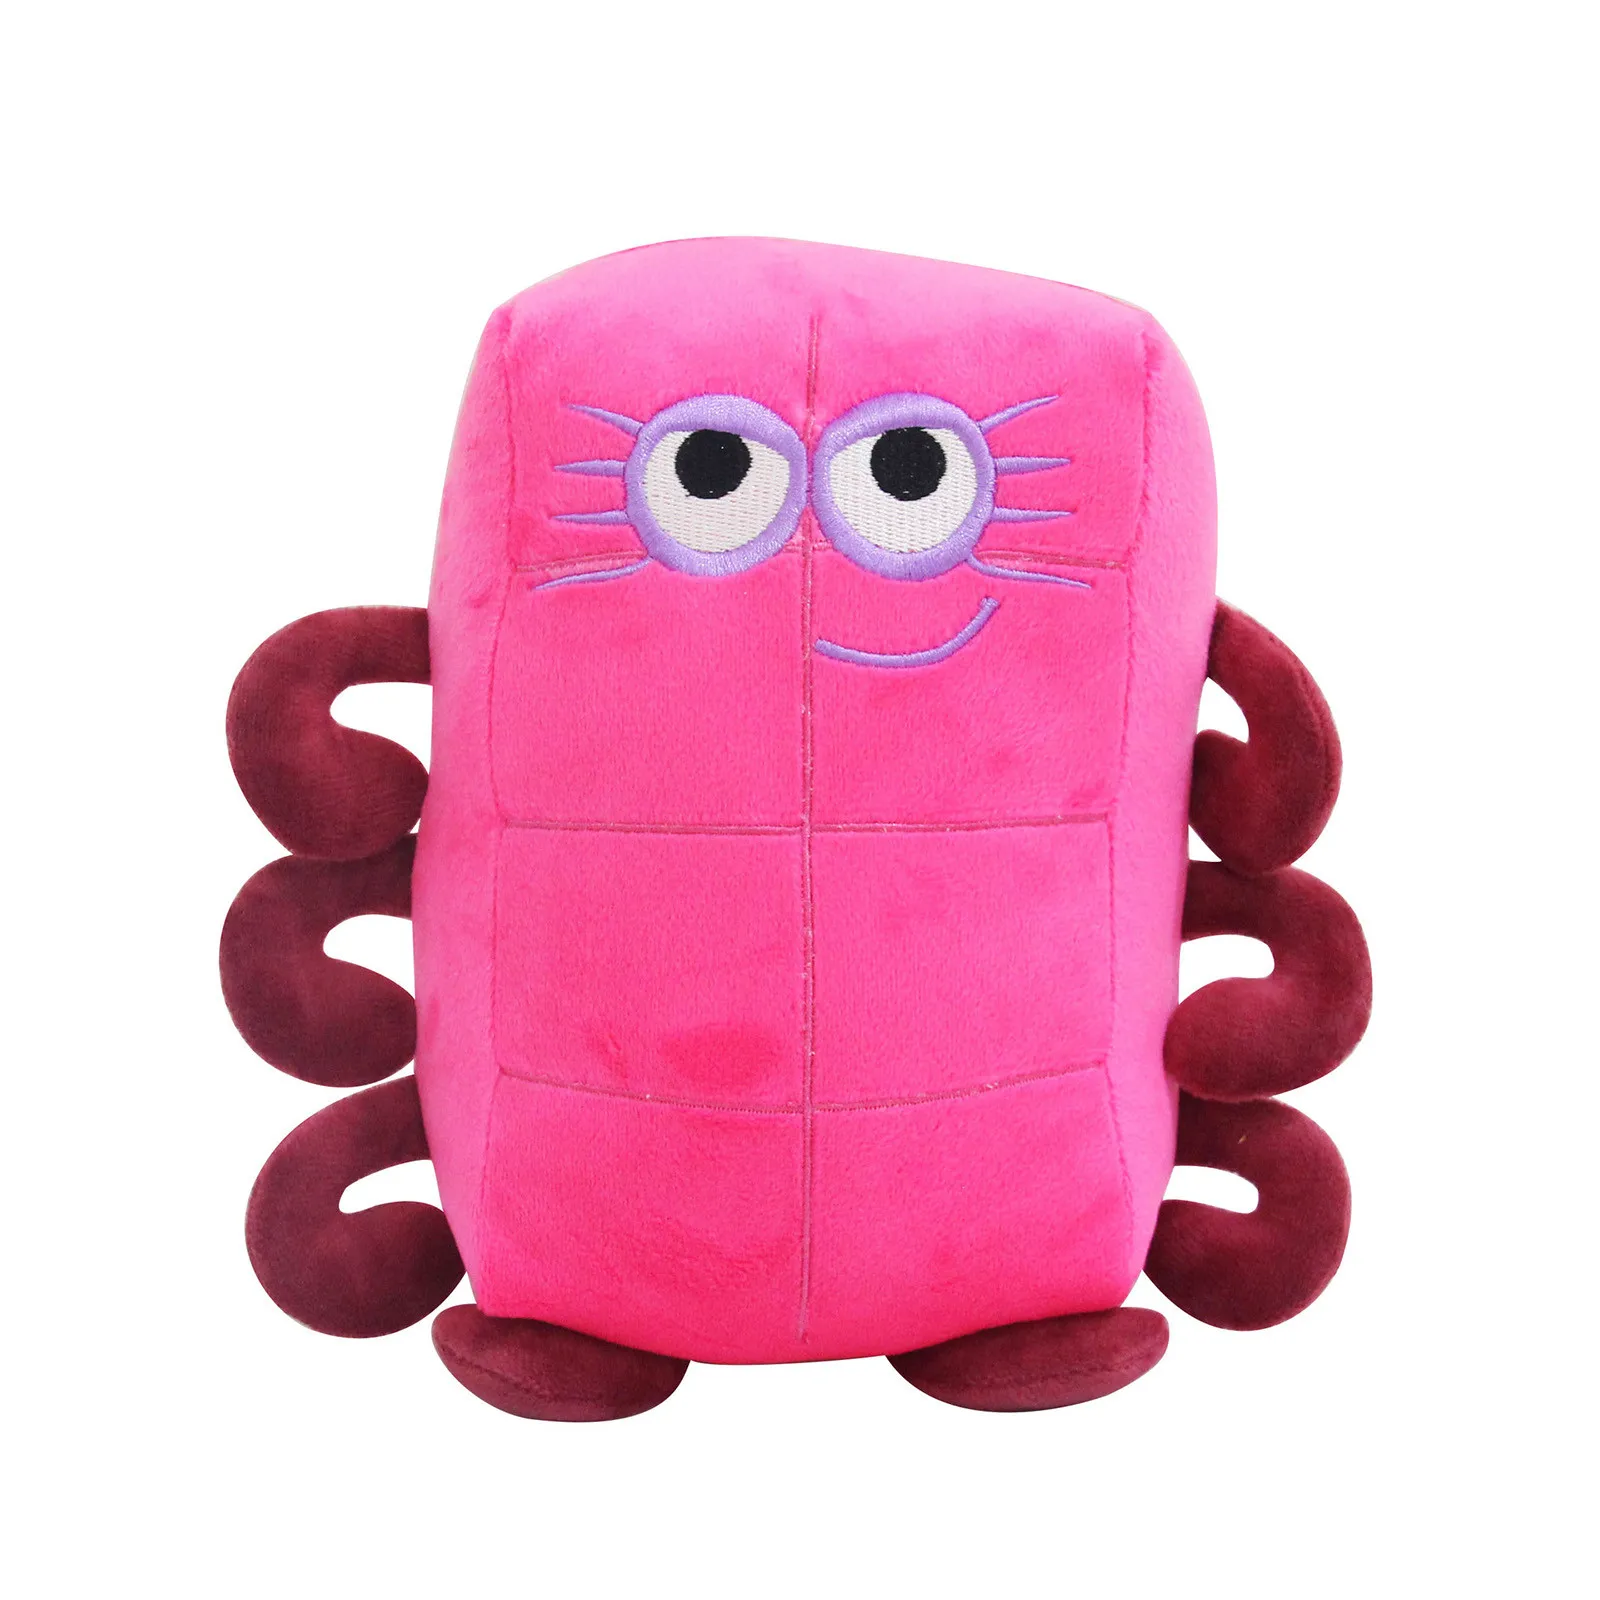 Numberblocks Cartoon Animation Soft Stuffed Pillow Toy for Kids Mathematics Enlightenment Animation Plush Doll 1-10 Numberblocks Birthday Decorations for Party Supplies Numberblocks Plush Toys 